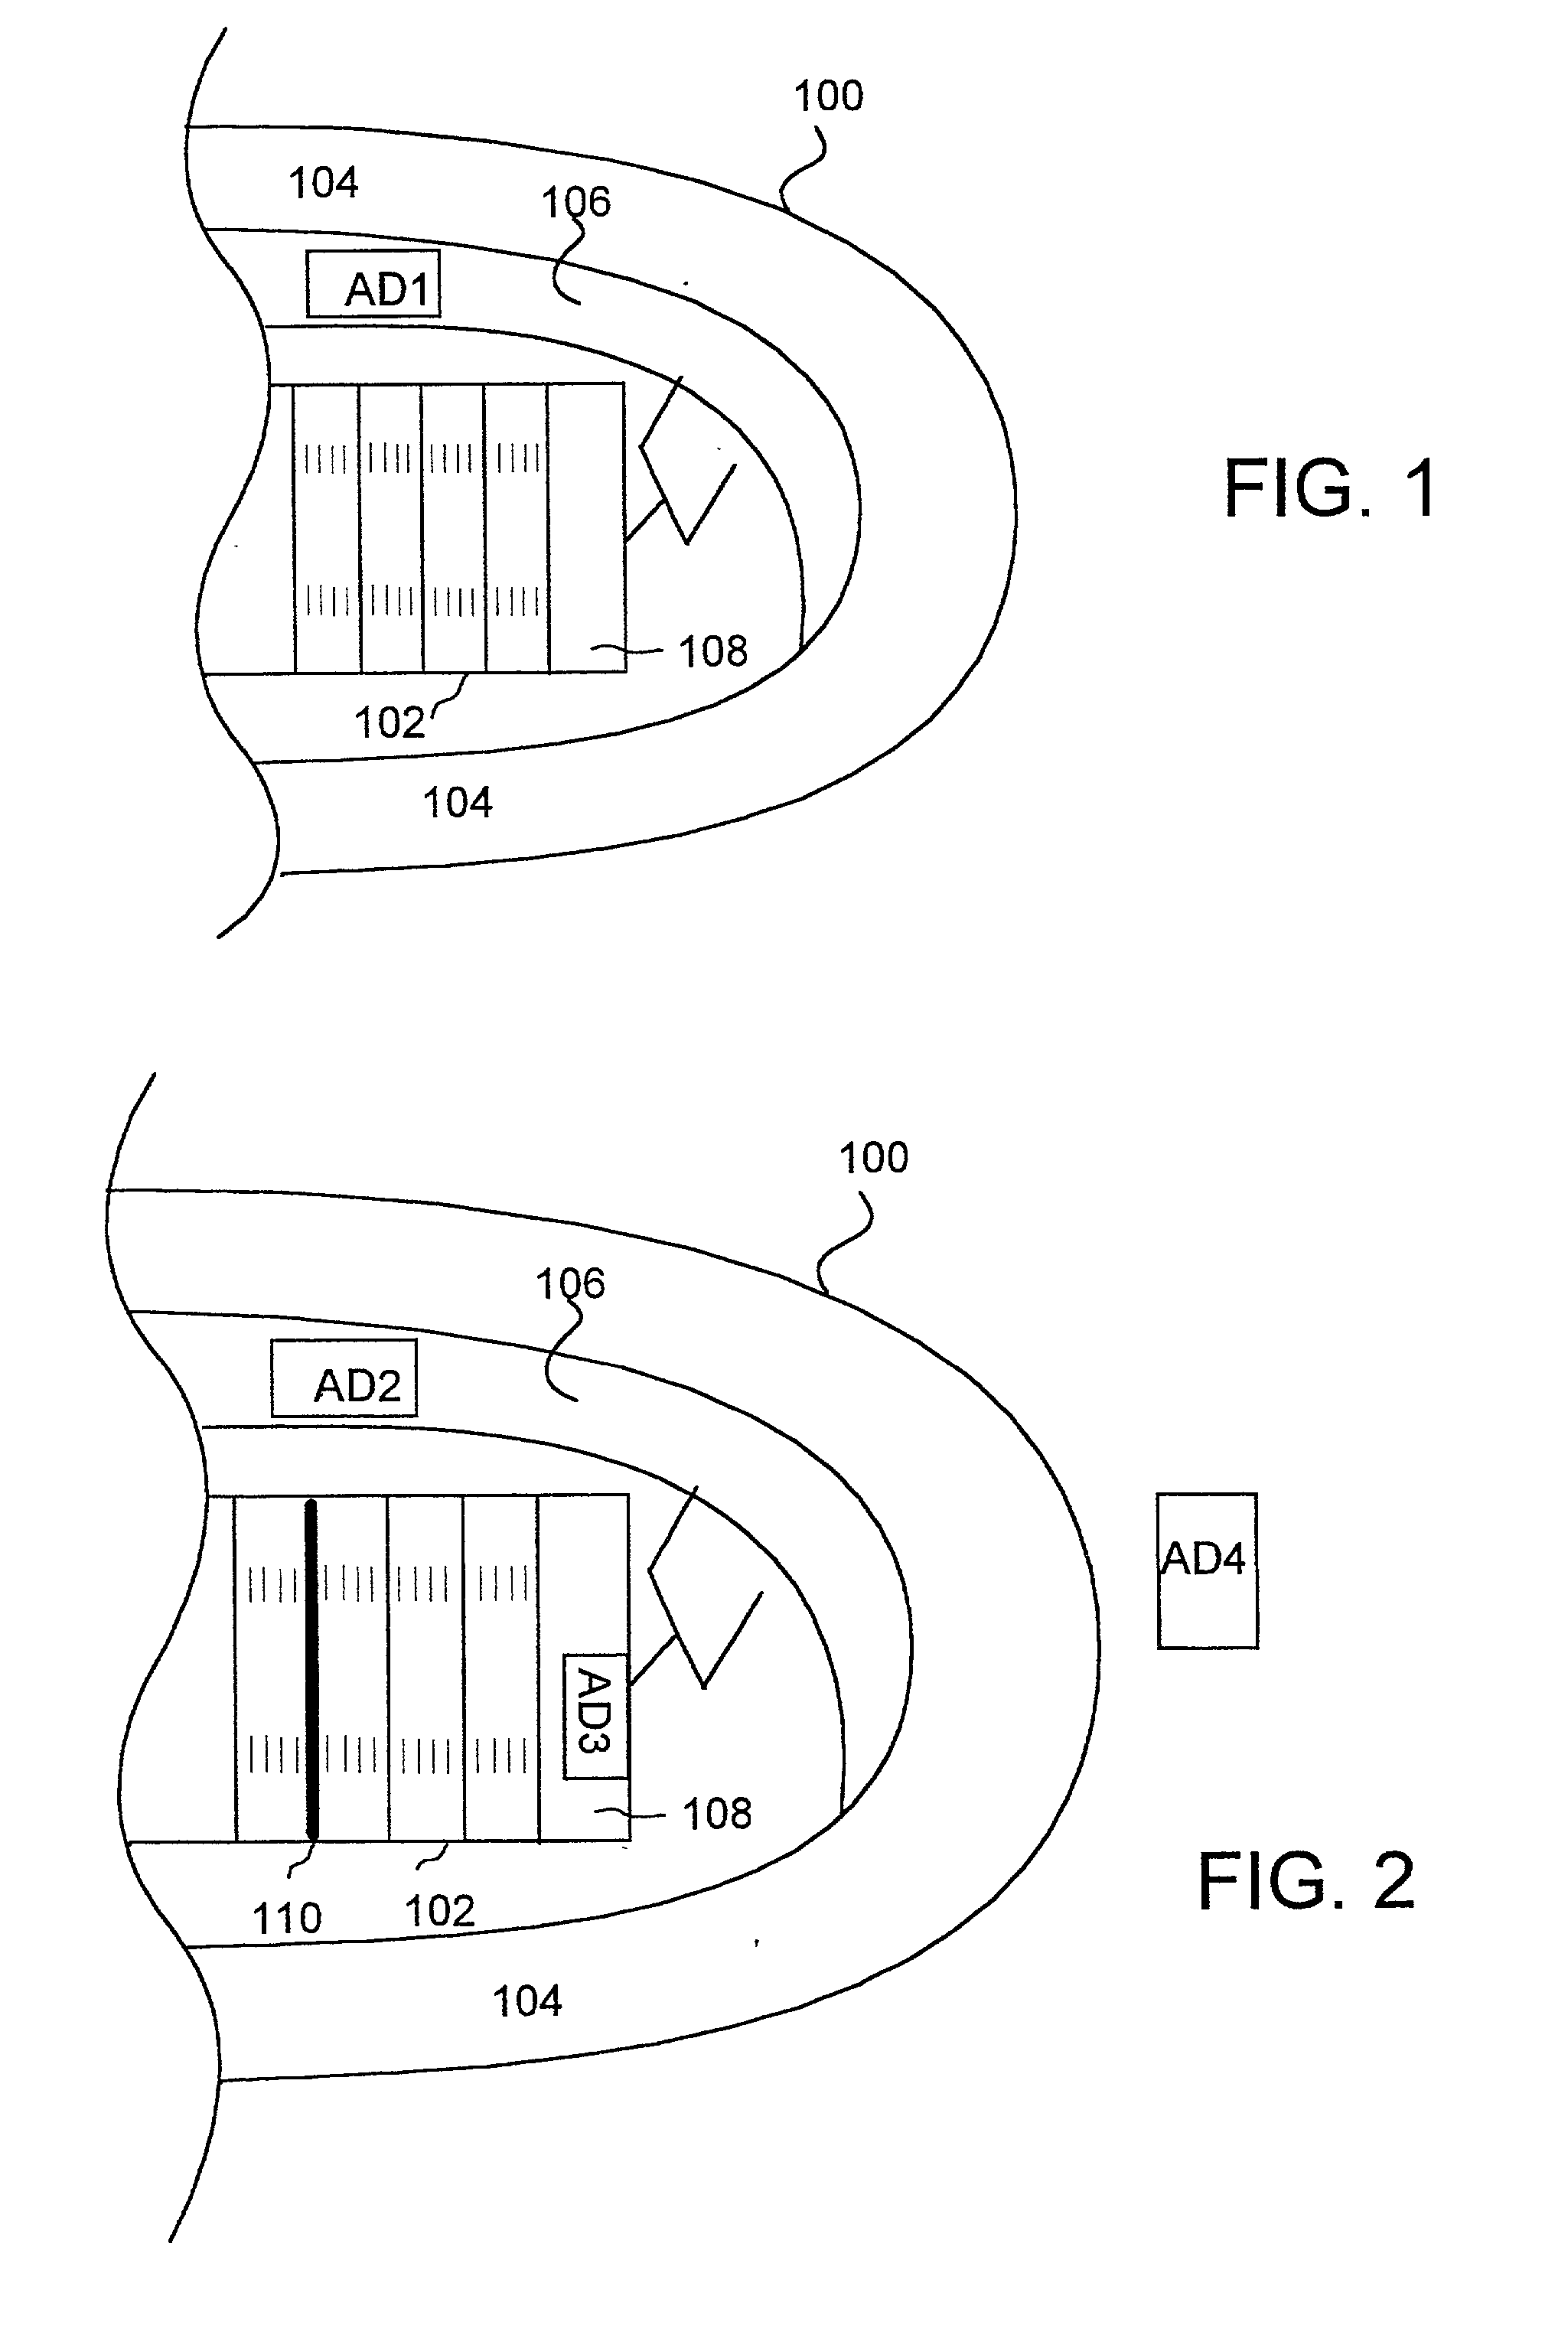 Method and apparatus for enhancing the broadcast of a live event